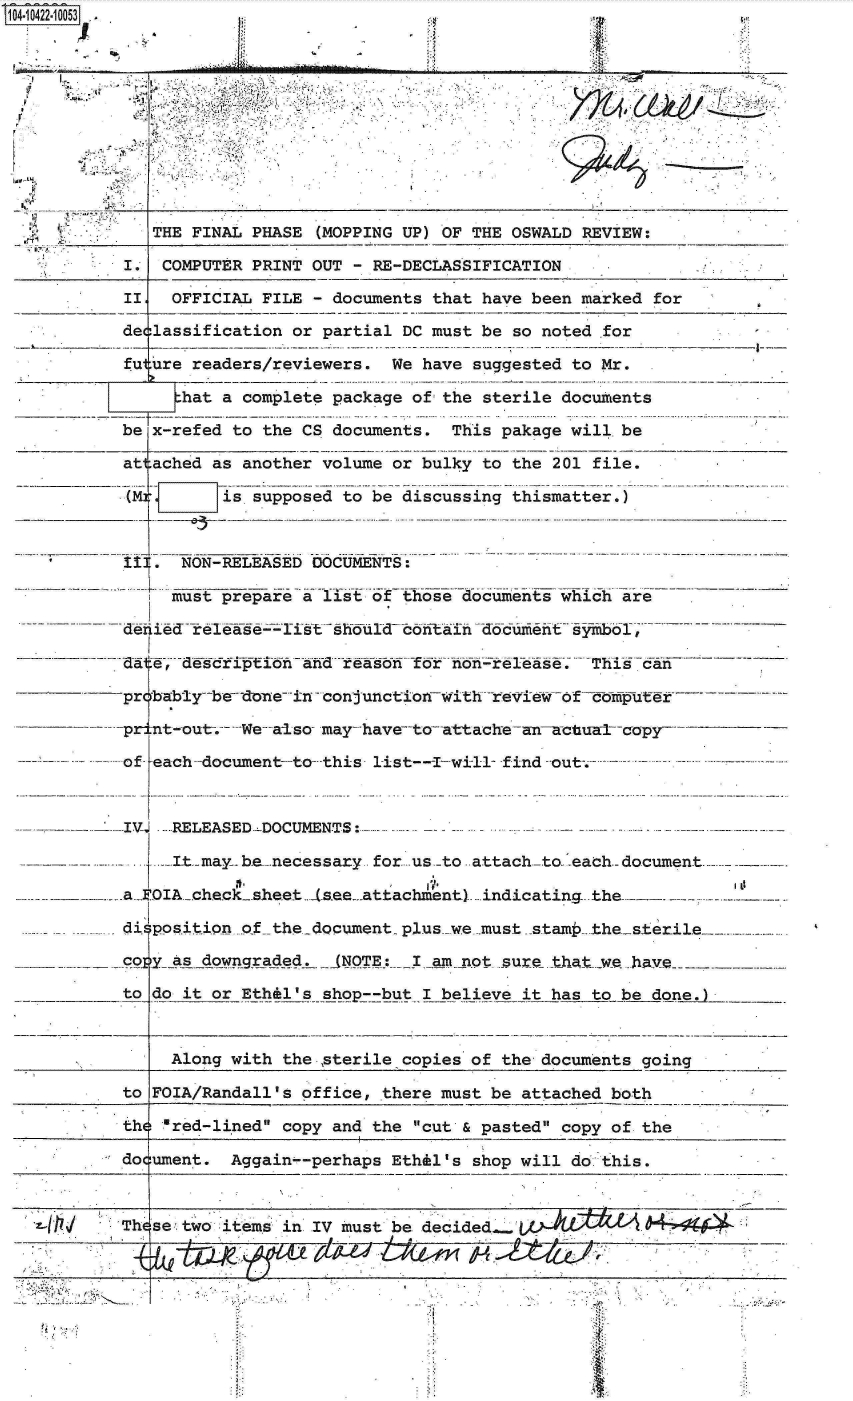 handle is hein.jfk/jfkarch19629 and id is 1 raw text is: 0O4-10422-10053





                                .................................





              THE FINAL PHASE (MOPPING UP) OF THE OSWALD REVIEW:

           I.  COMPUTER PRINT OUT - RE-DECLASSIFICATION

           II   OFFICIAL FILE - documents that have been marked for

           declassification or partial DC must be so noted .for

           fu ure readers/reviewers.  We have suggested to Mr.

                 hat a complete package of the sterile documents

           be x-refed to the CS documents.  This pakage will. be

           attached as another volume or bulky to the 201 file.

           (M.       is supposed to be discussing thismatter.)



           II[.  NON-RELEASED DOCUMENTS:

                must prepare a l1st of those documents which are

           -deiie releaserist   shoild contaitdculflefi~t siimbol,;-- -

           dat,   es fi anhd reason for nierase. This can

           probably--be-dein  - conjunction-with revie of foltiputer

           priat-out-  We--aiso may- have-to- attache -anc -acual--copy-

           of each-document-to this list---I-wi-ll- find -out-.---


           IVJ  RELEASED.DOCUMENTS:-

                 Itmay be.necessary for us .-to attach-to each-document.

           a- OIA.check-sheet (s.ee-.attachment).. indicating. -the..

           di position of the document plus-_we -must stam thesterile

           co y as. downgraded.  NOTE:  I am not sure tha

           to do it or Eth-l   shop--but I believe it has to be done.



                Along with the sterile copies of the documents going

           to FOIA/Randall's office, there must be attached both

           the red-lined copy and the cut & pasted copy of the

           document.  Aggain--perhaps Ethil's shop will do this.



           Th setwo  items in IV must be decided.   L   DL

                   f ~.4


